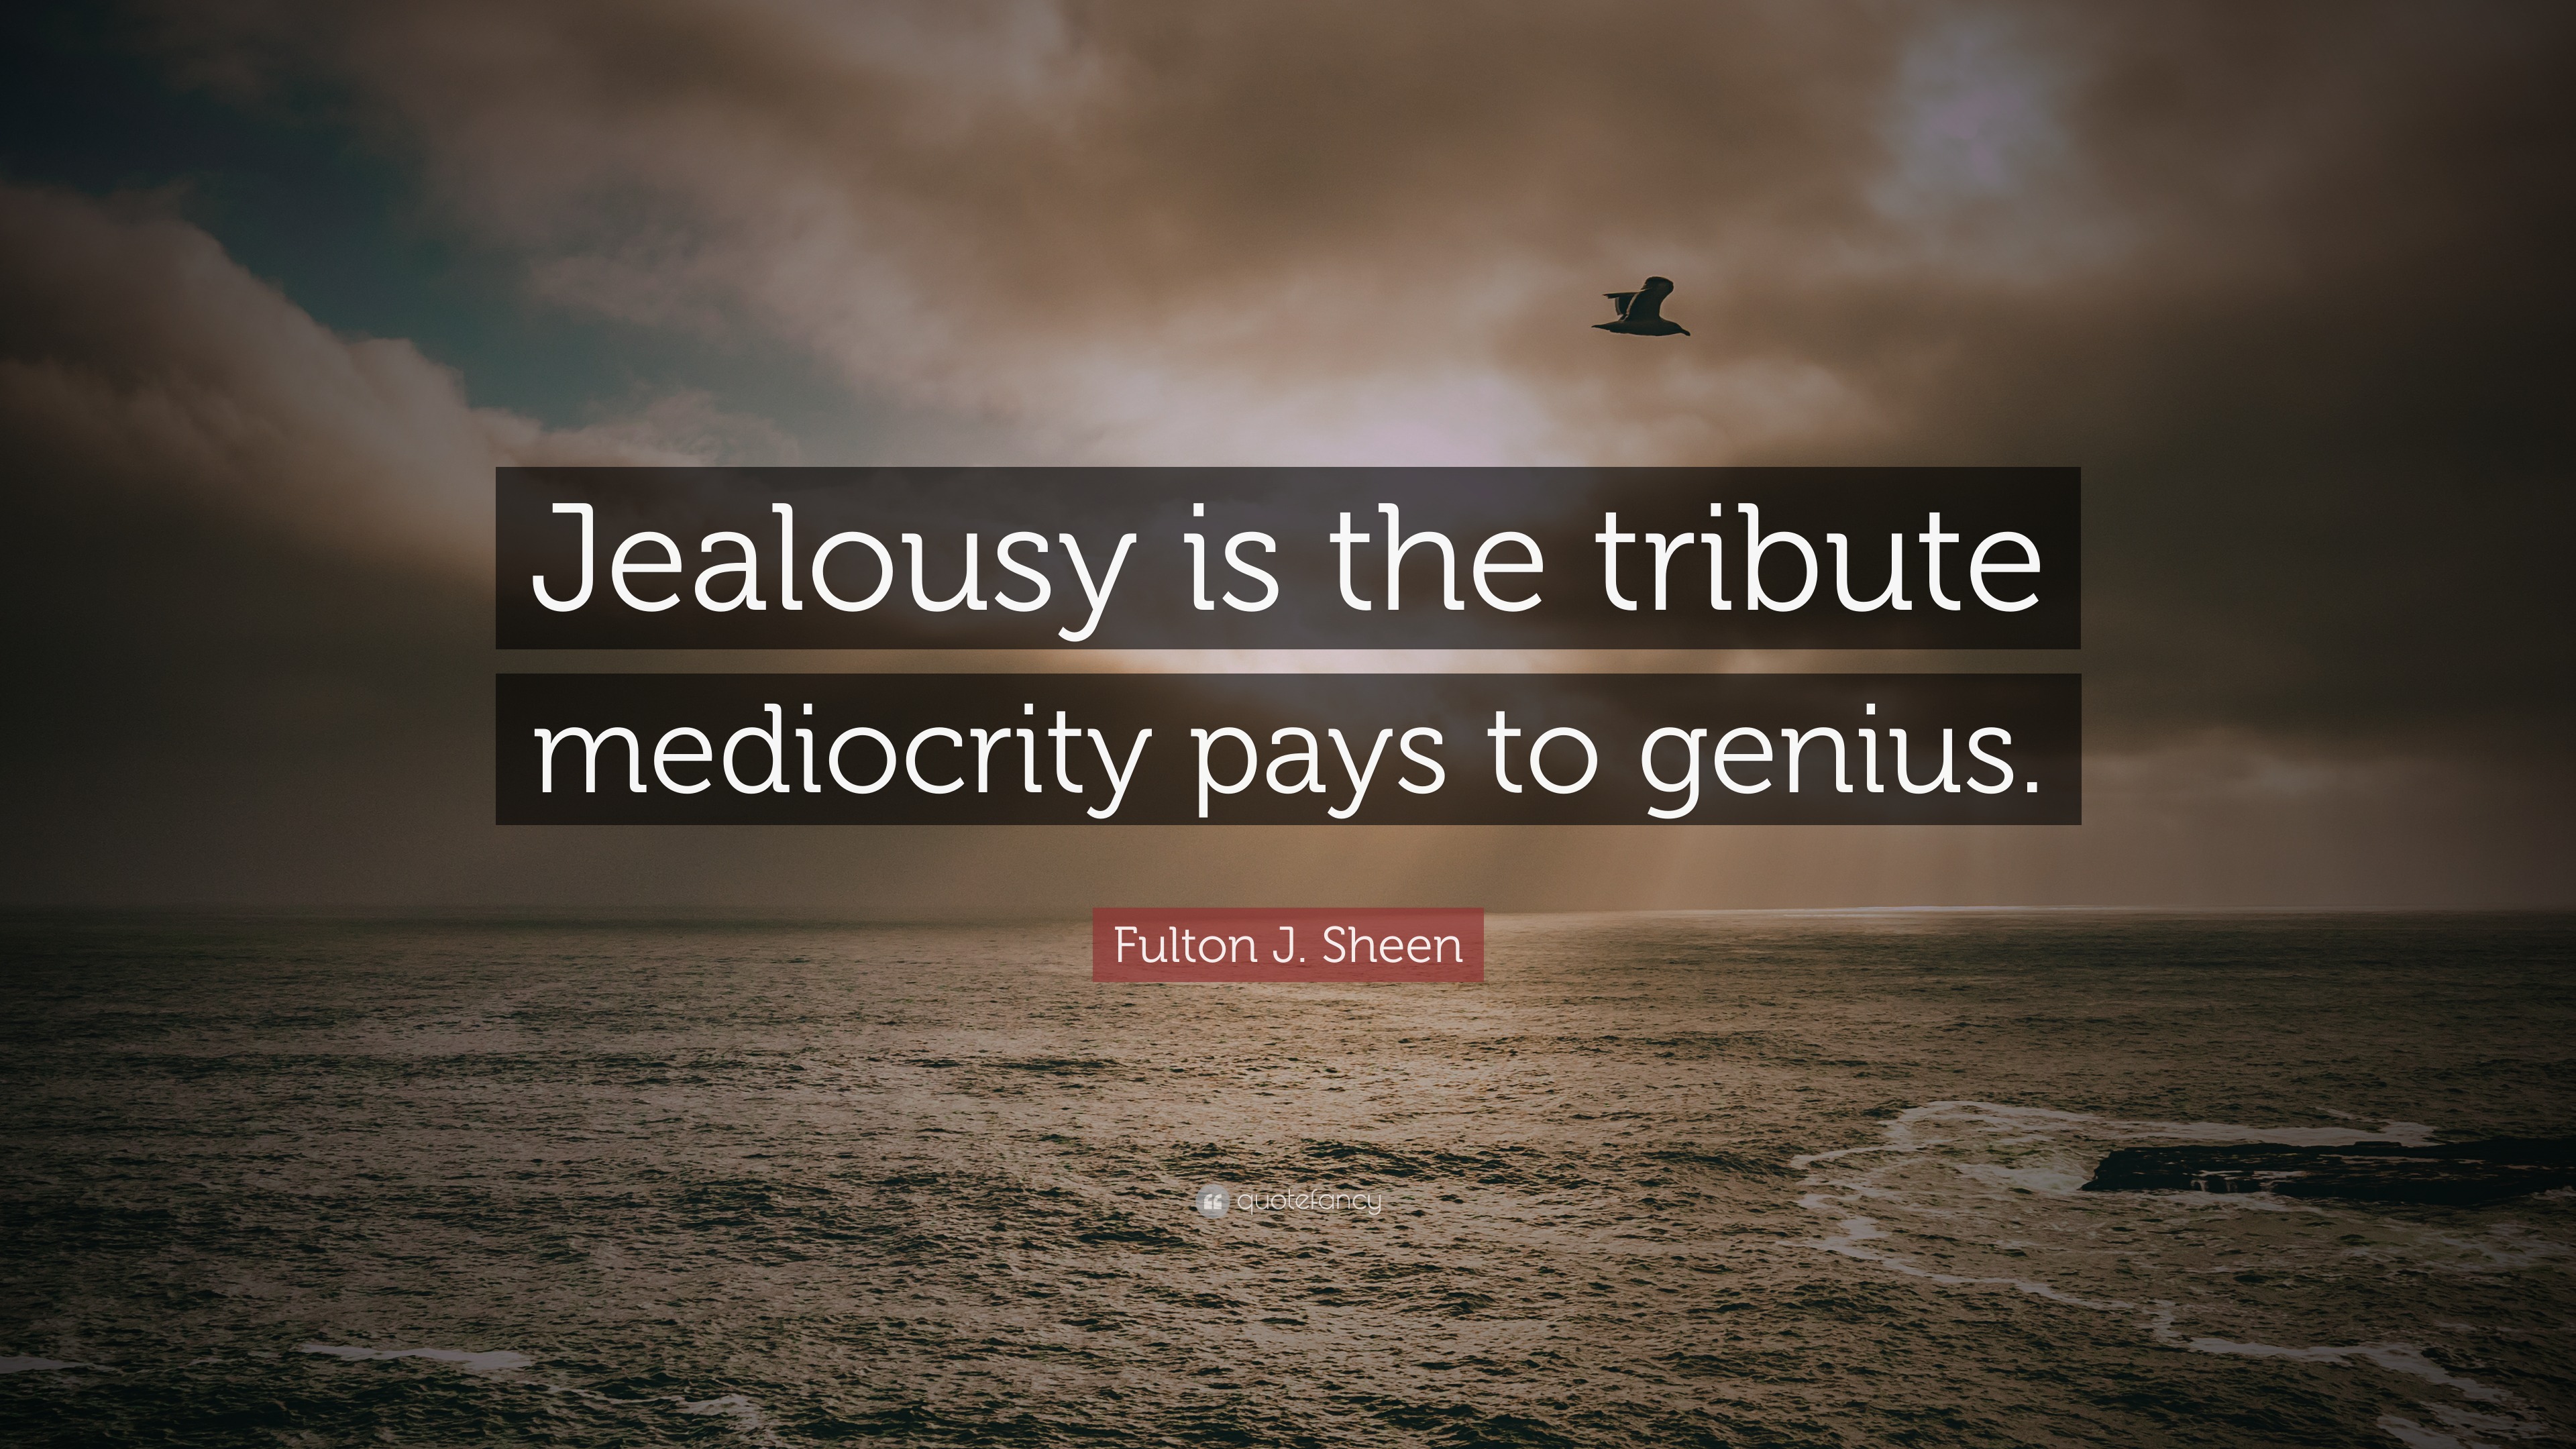 Tribute pays genius to jealousy mediocrity the is